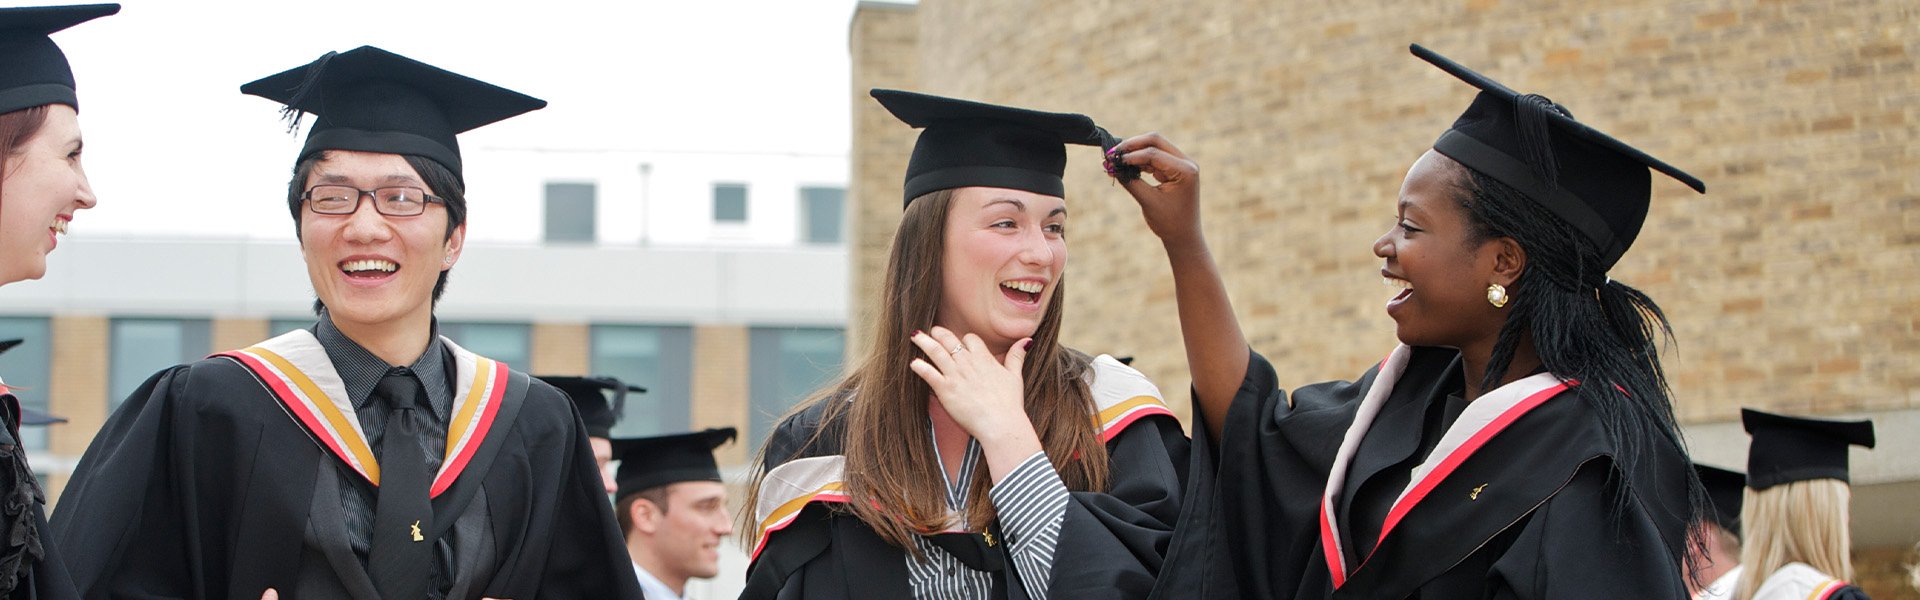 Graduating students share a joke whilst dressed in caps and gowns